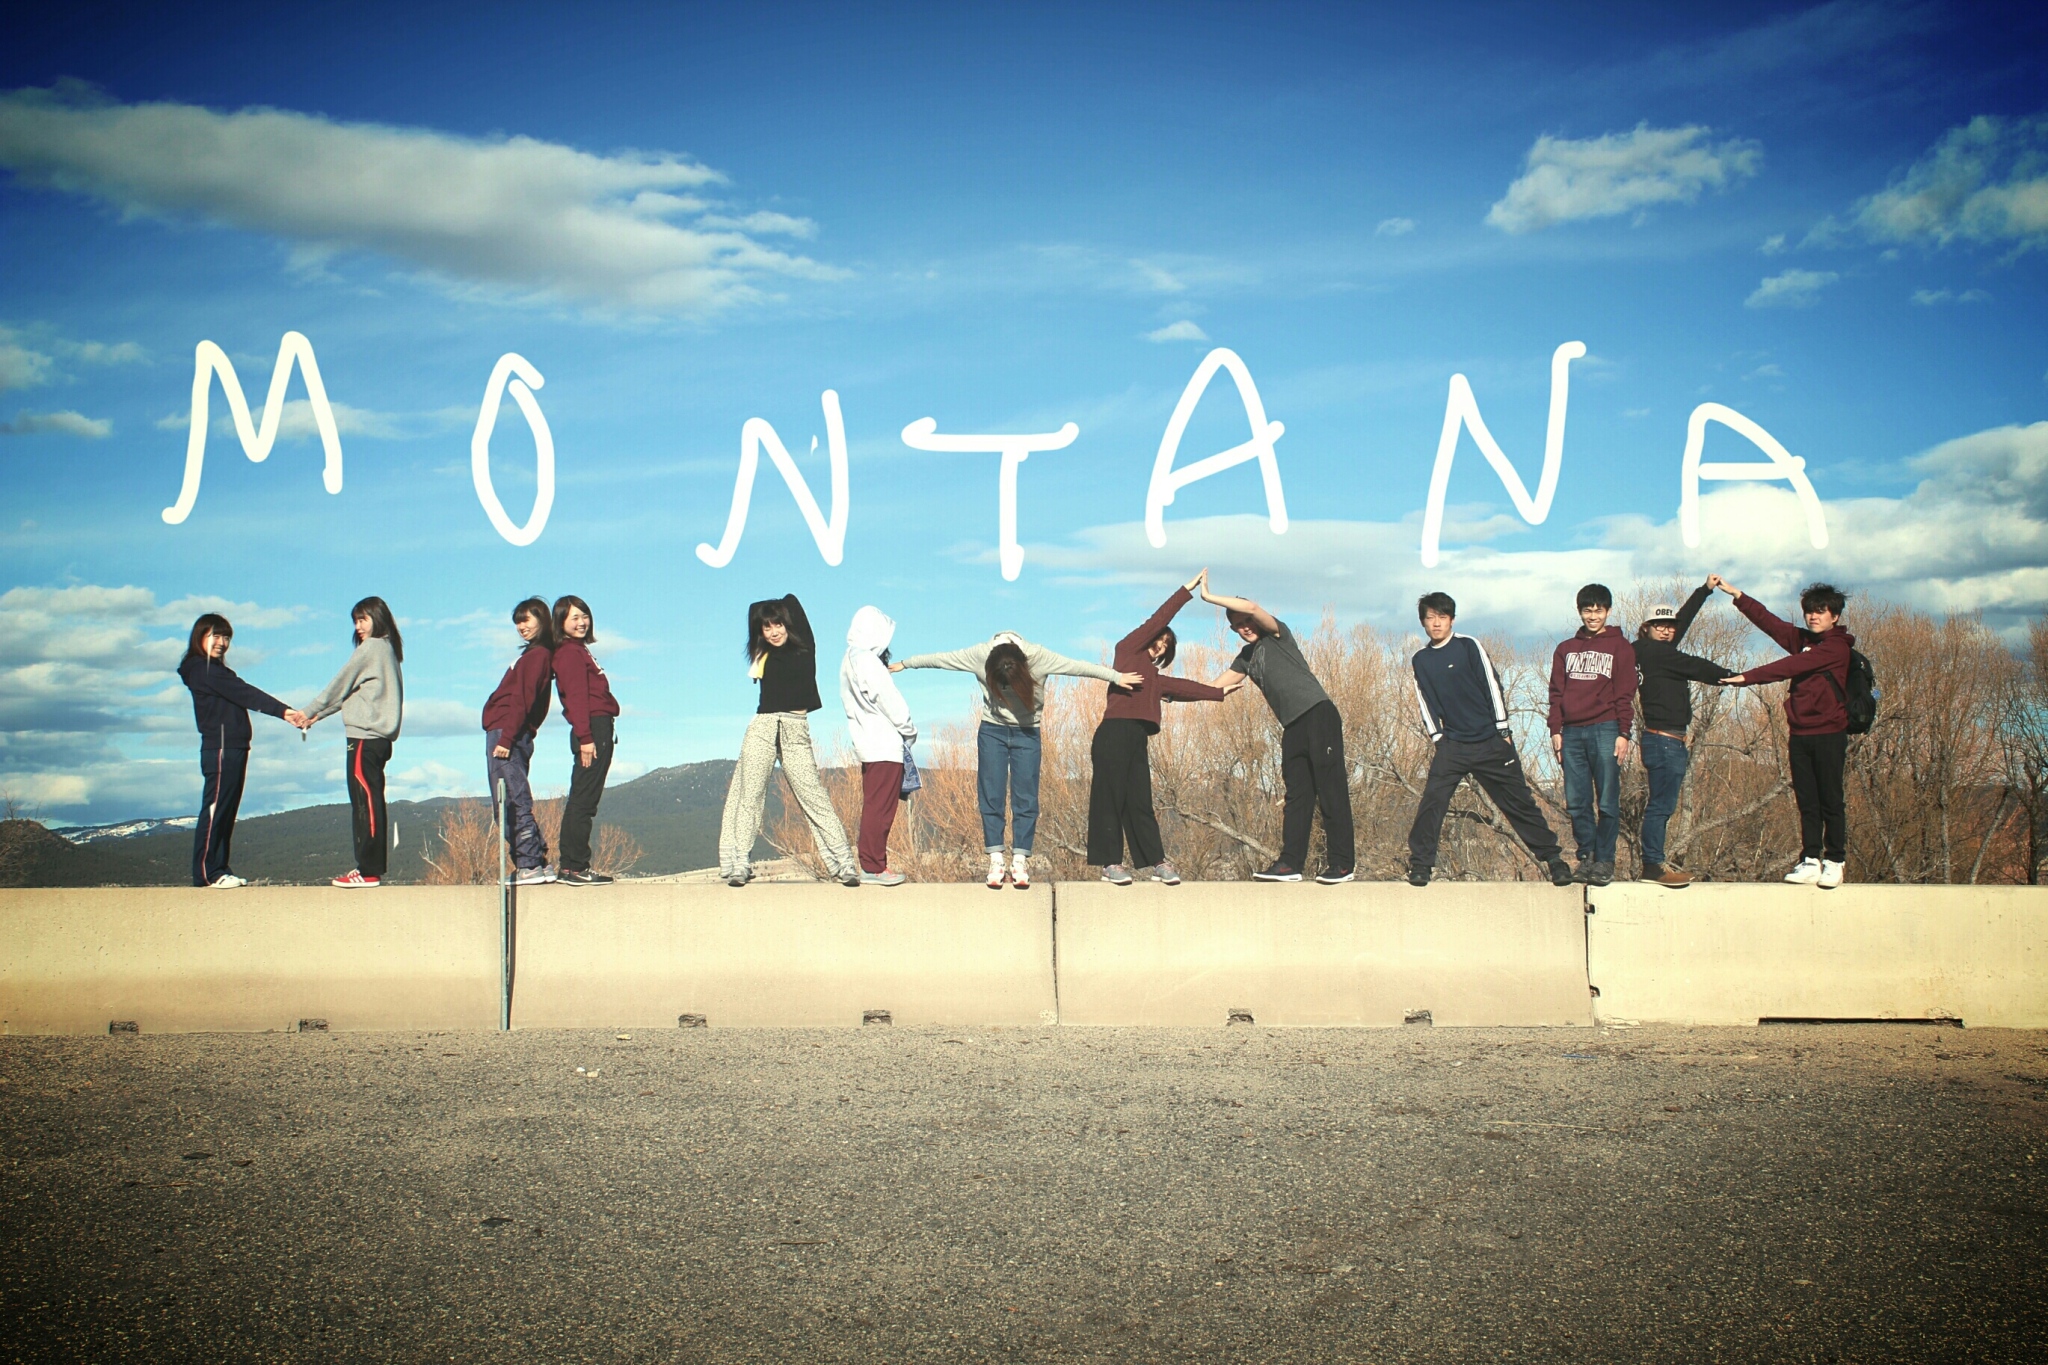 International students pose to spell out the name Montana